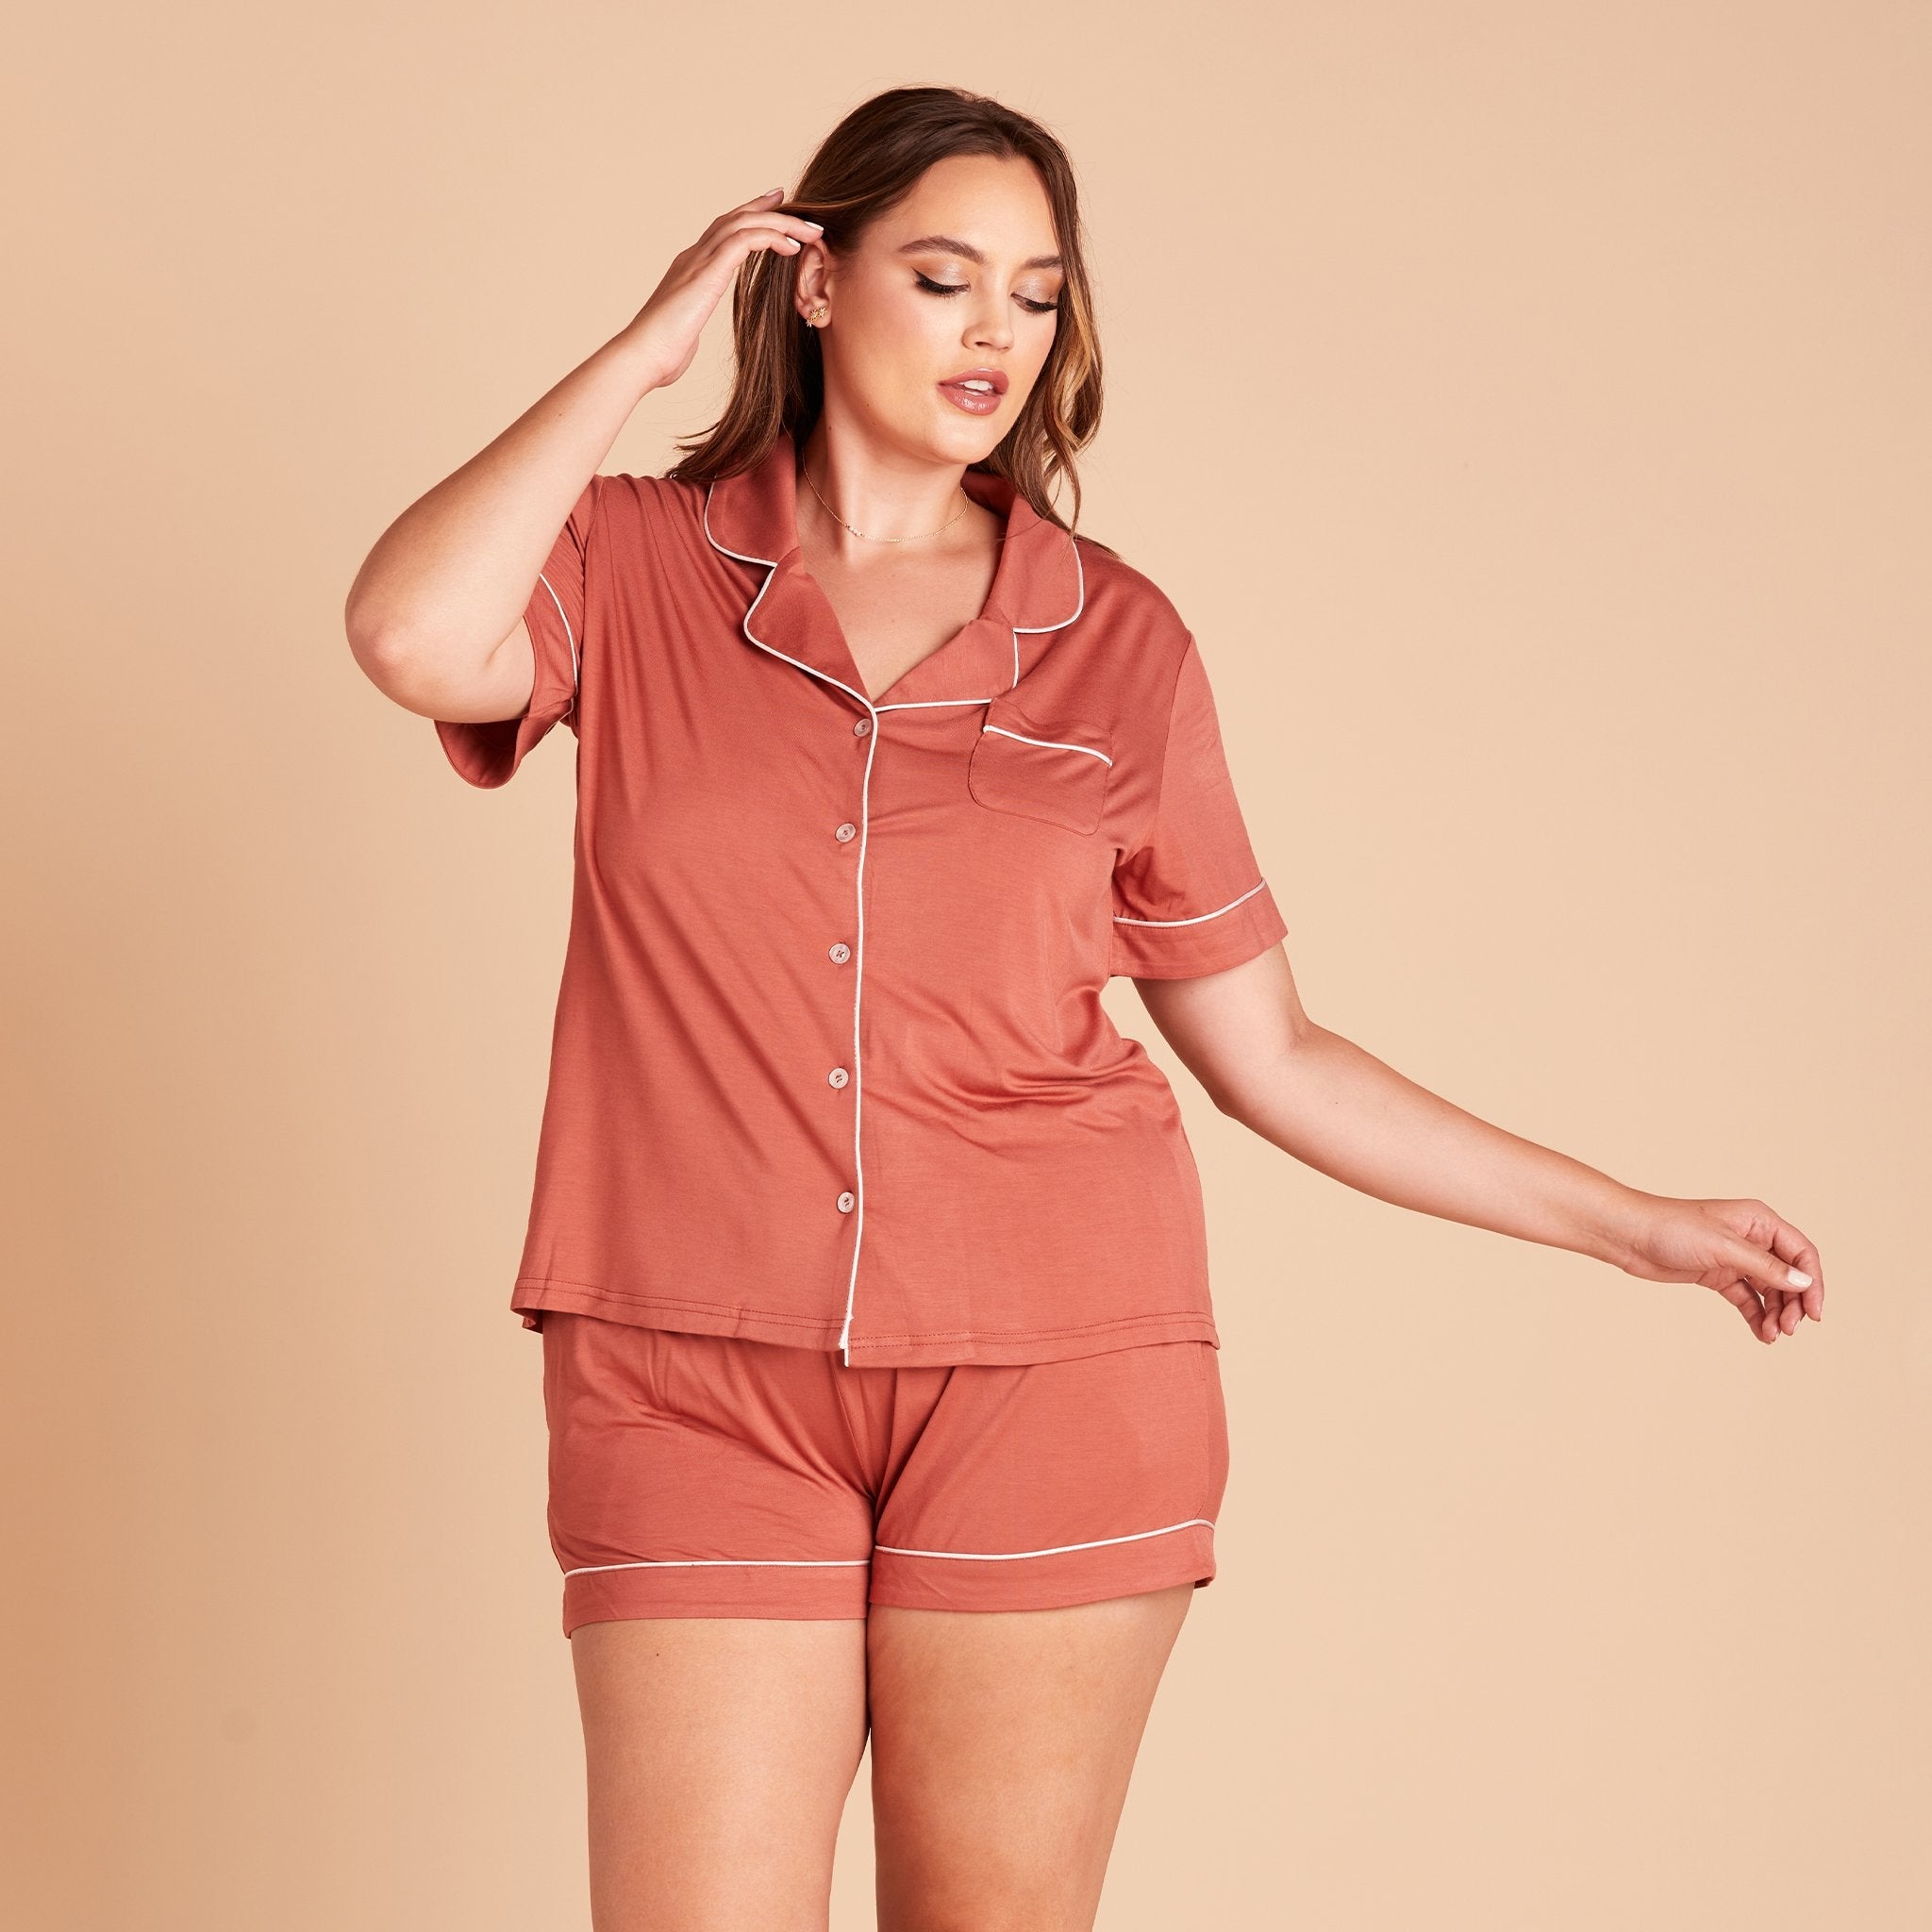 Jonny plus size Short Sleeve Pajama Set in terracotta with white pipetting by Birdy Grey, front view